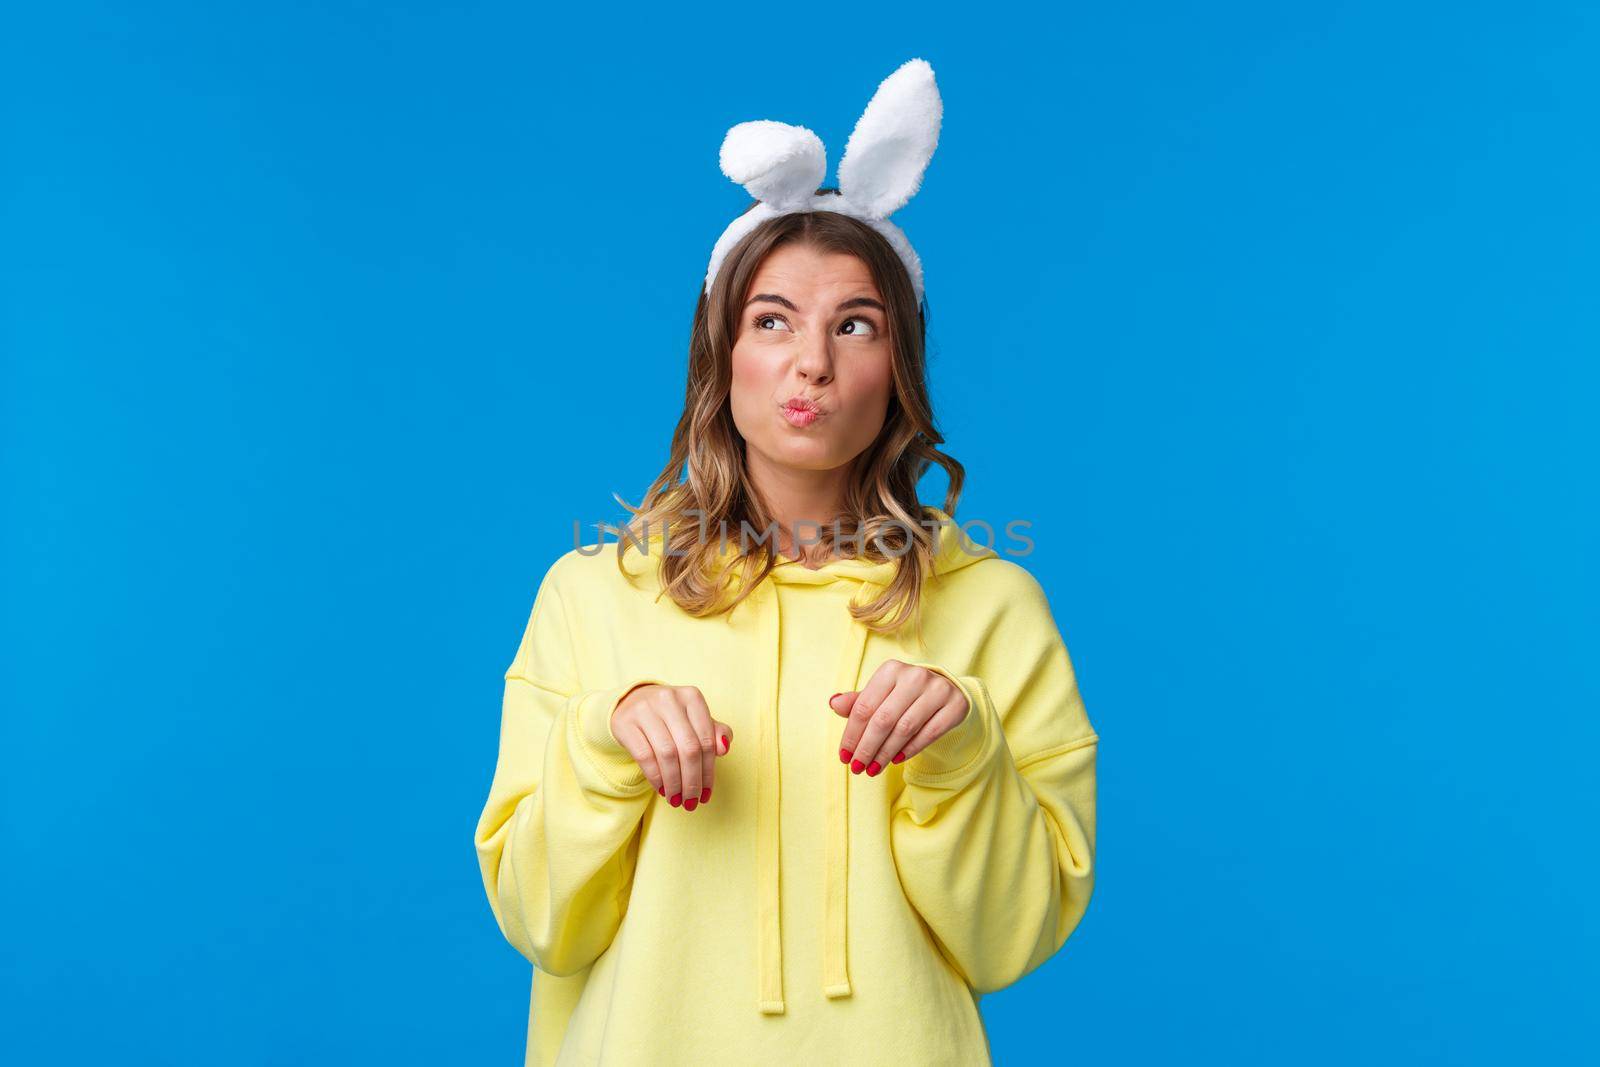 Thoughtful and cute funny blond girl acting like Easter rabbit with fake ears and paws gesture, pouting looking upper left corner mimicking bunny animal, stand blue background.